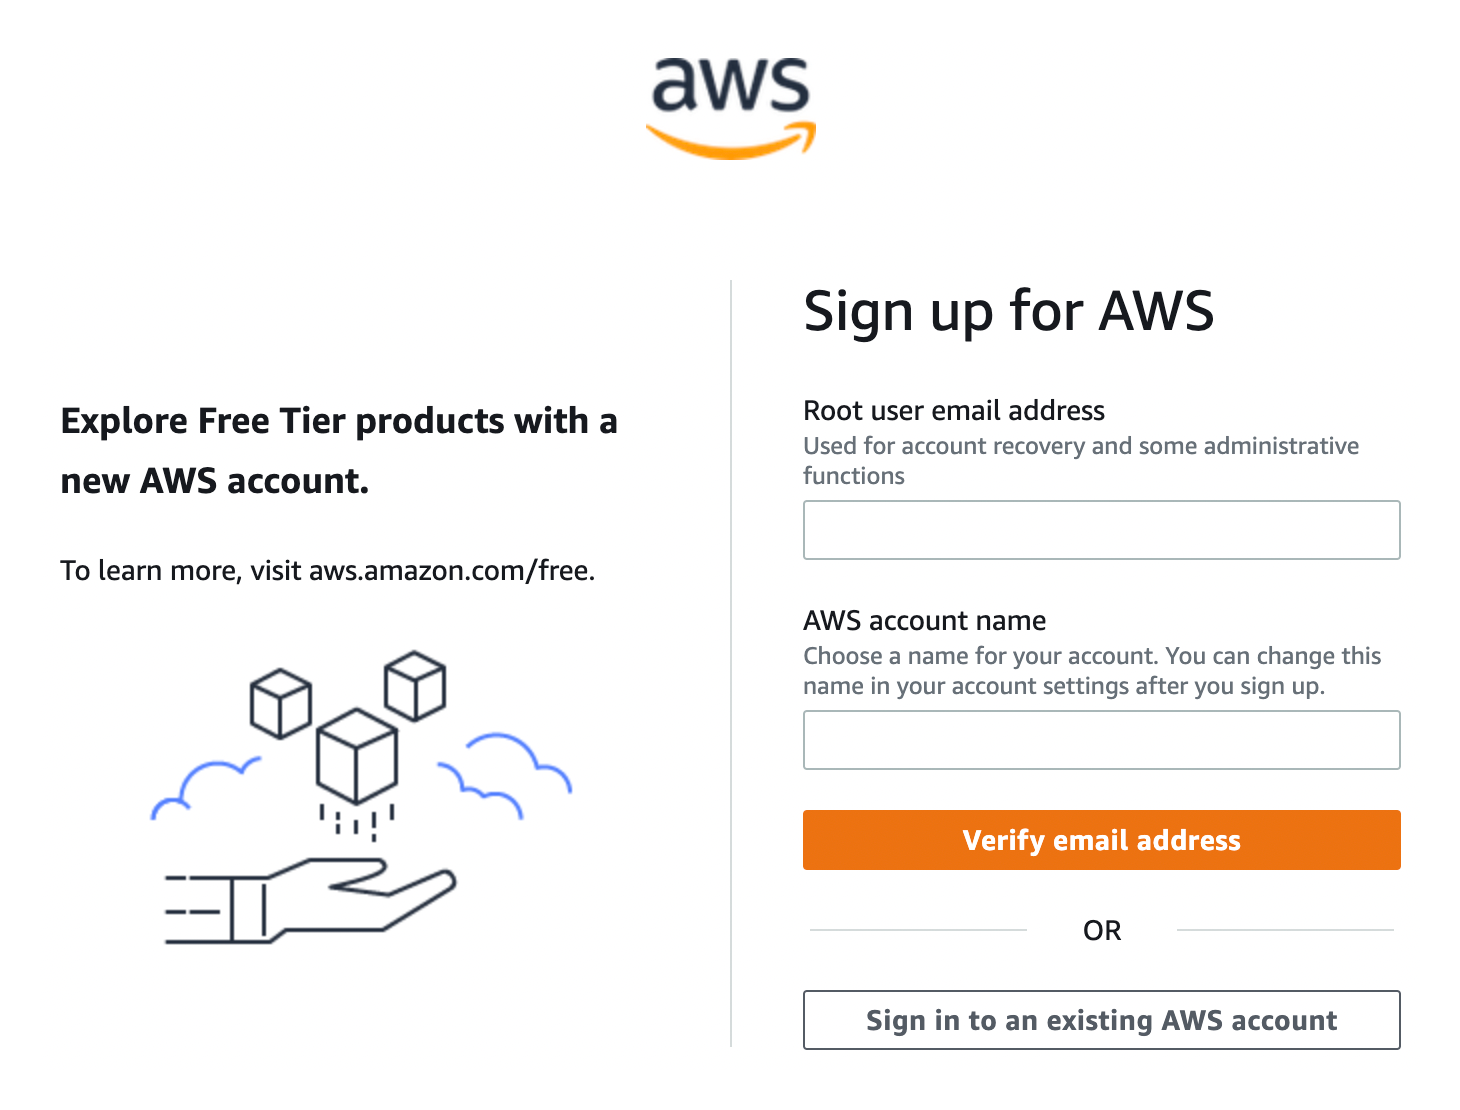 aws-signup-form.png